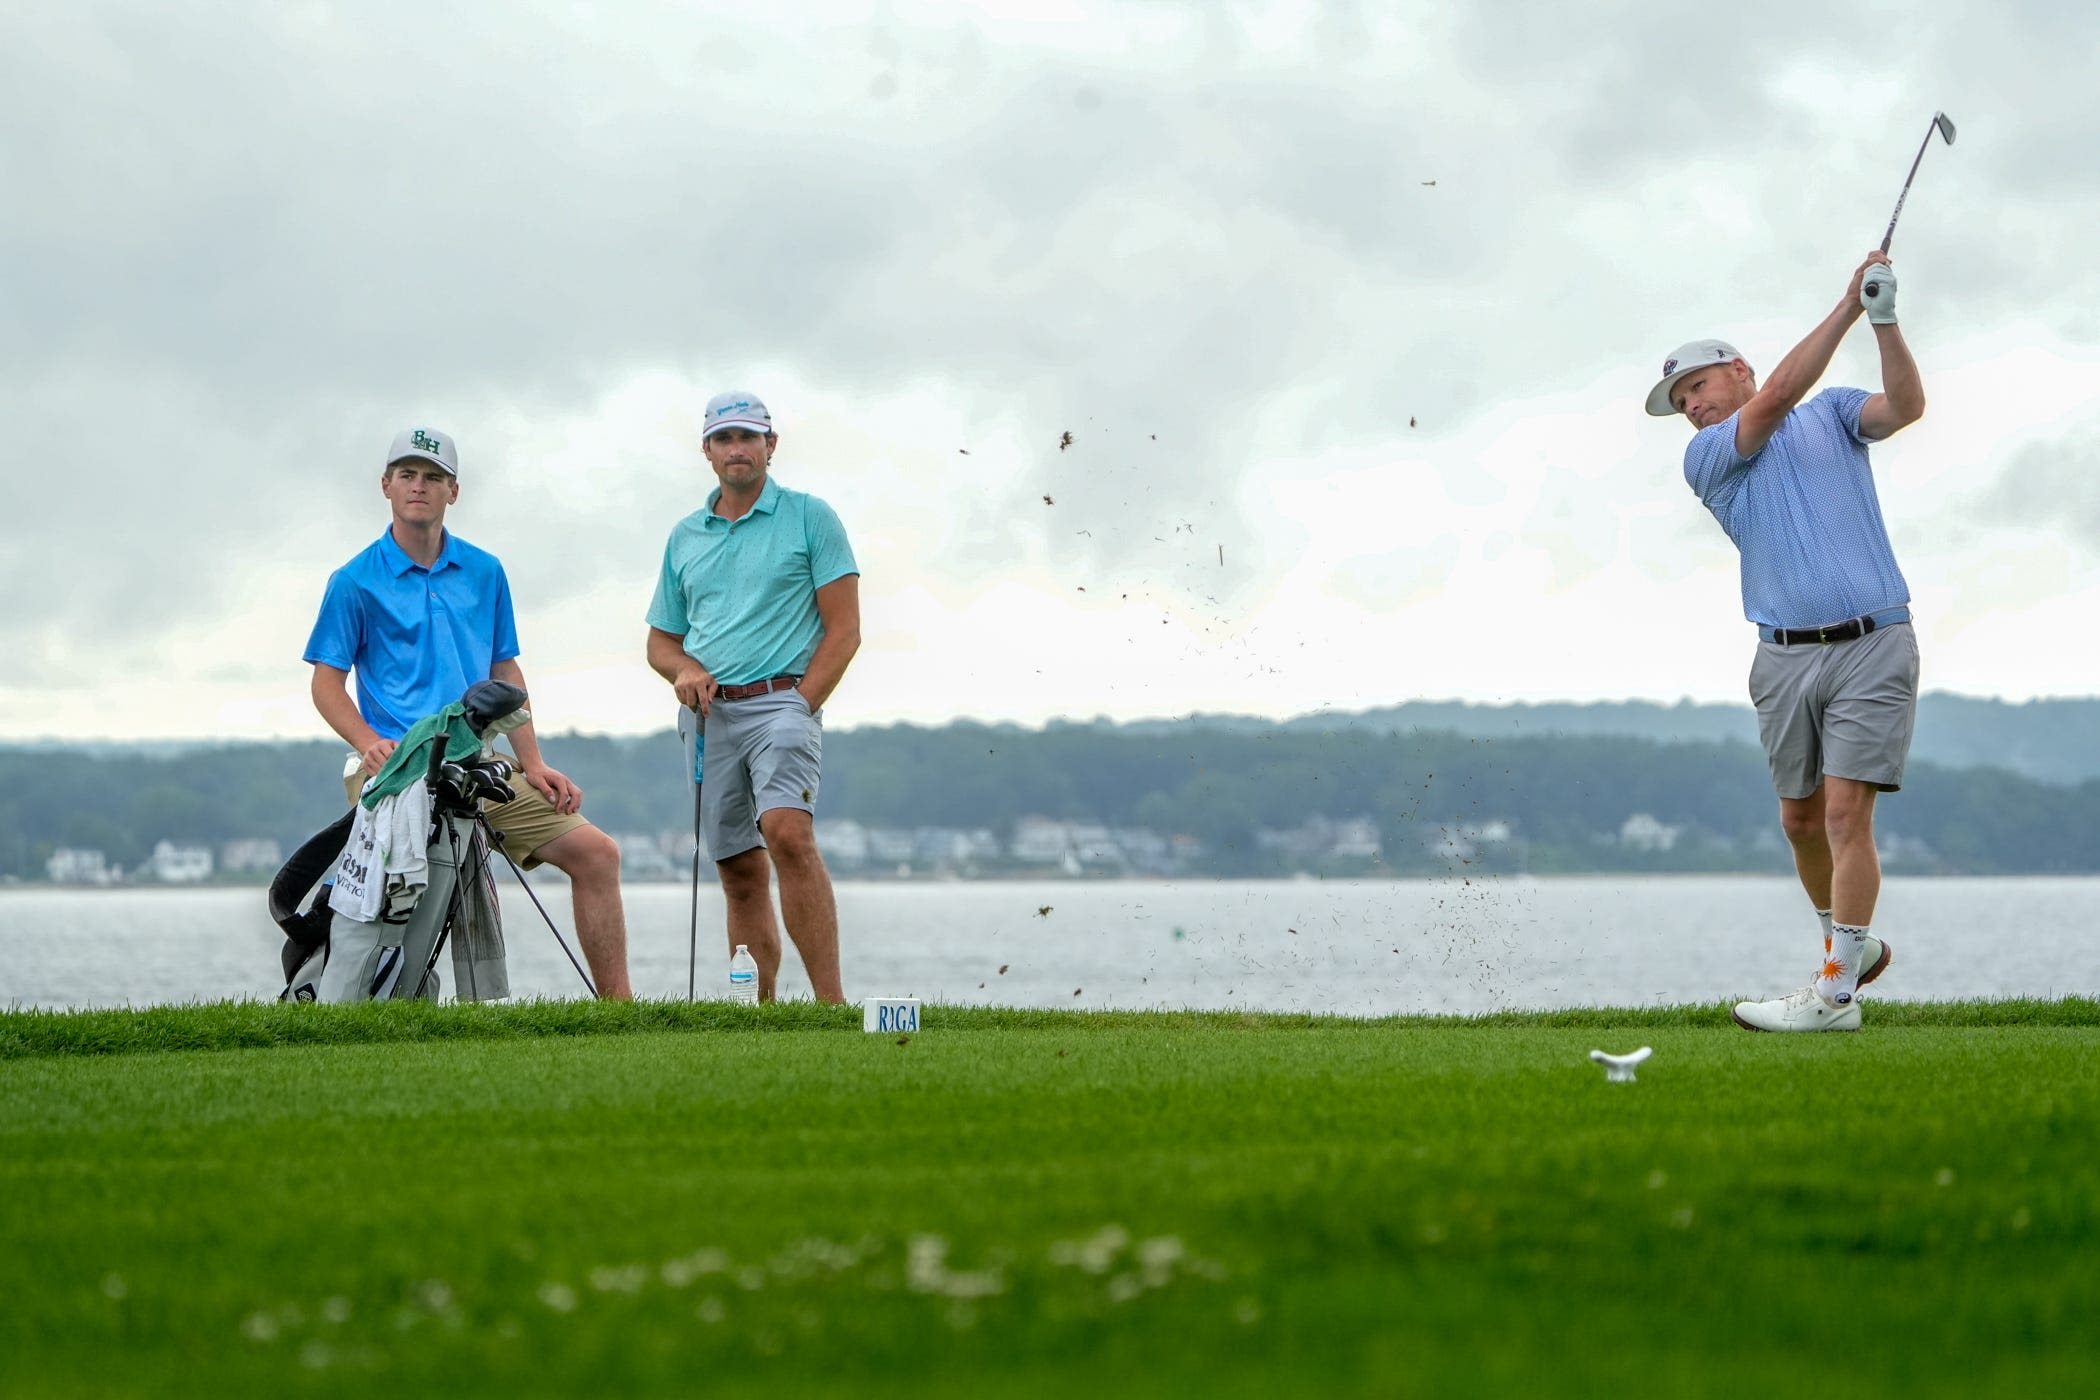 The secret to Bobby Leopold's win in record-breaking RI Amateur performance wasn't hard to see